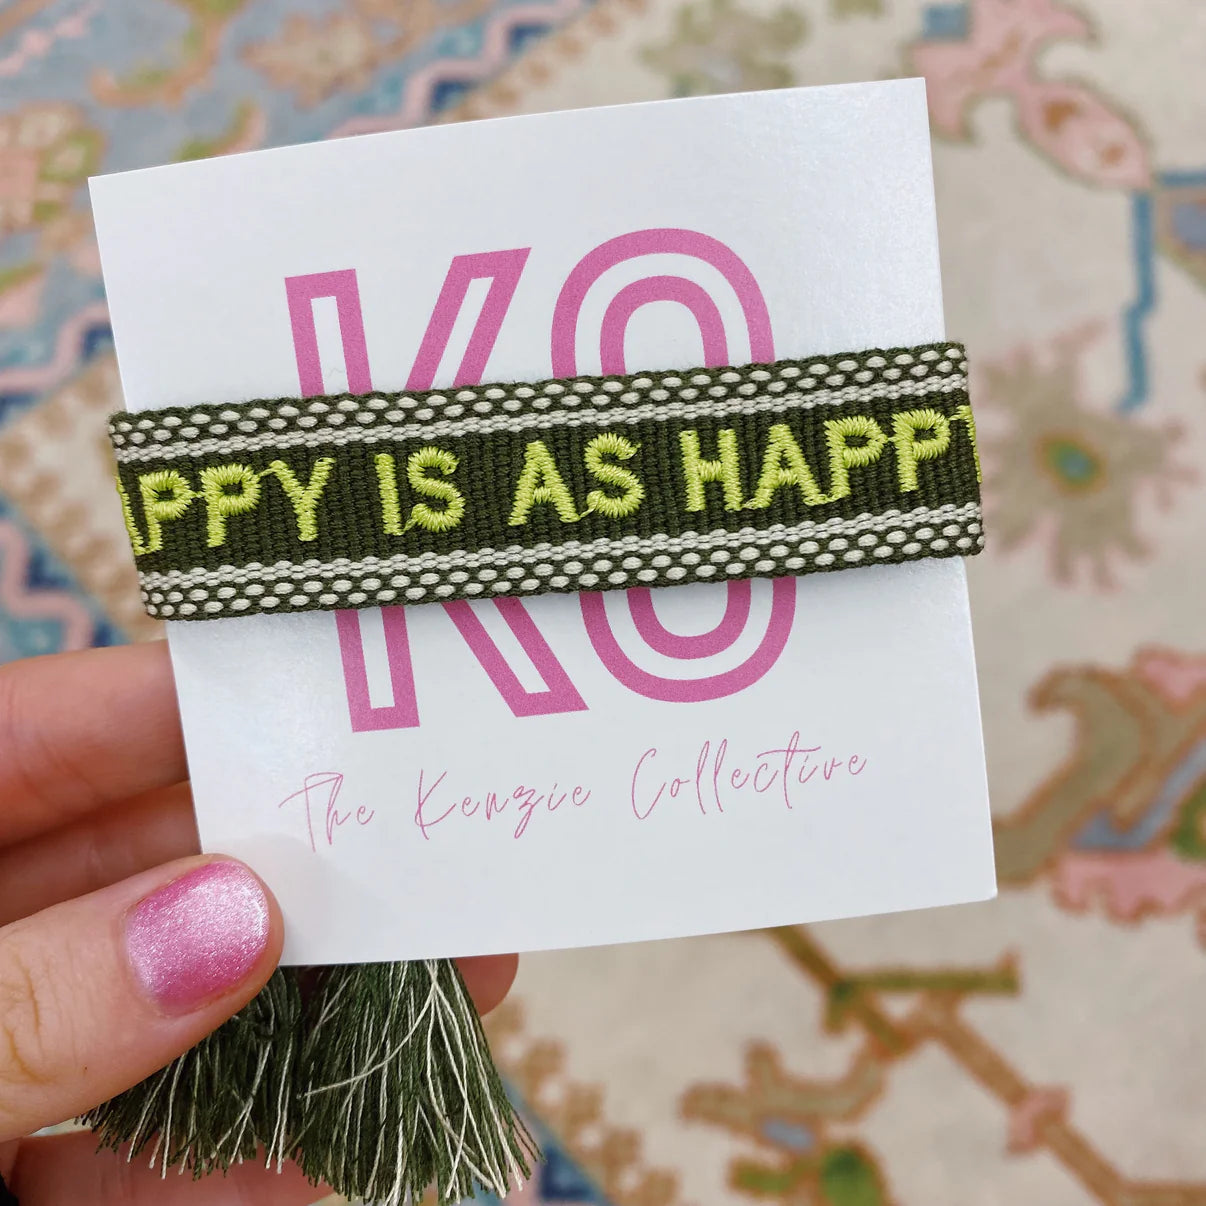 Happy Is As Happy Does | Kenzie Collective